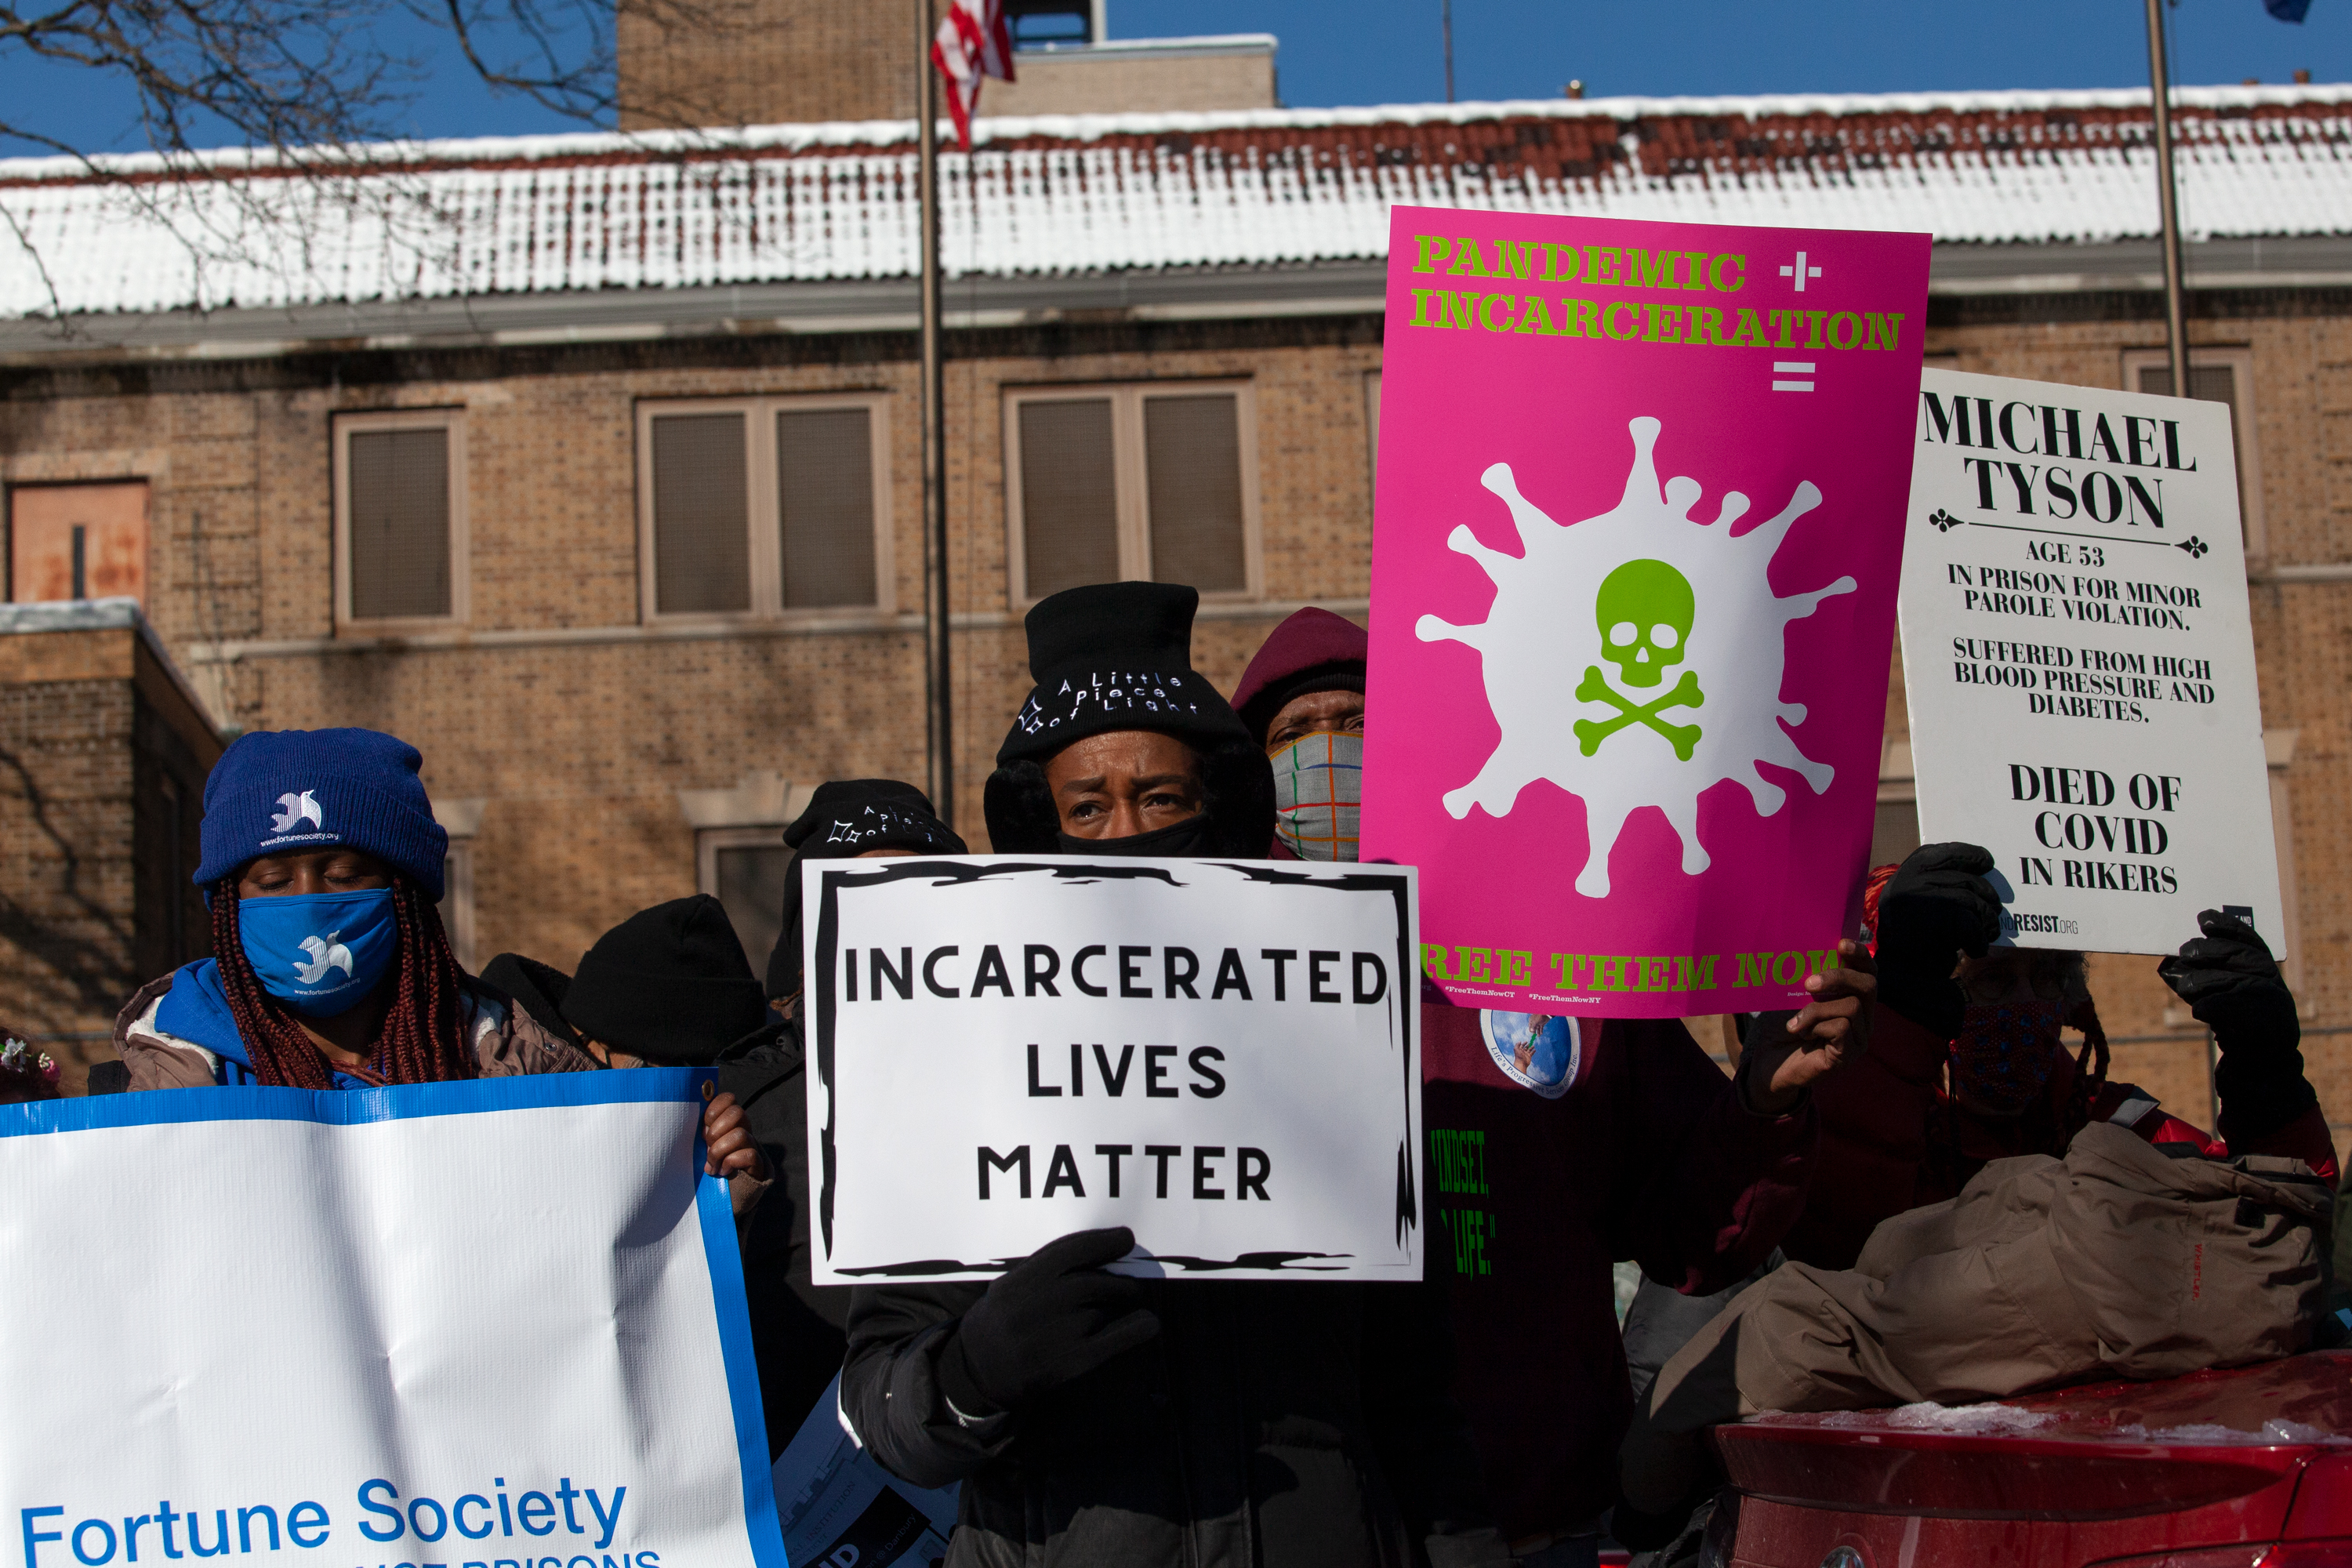 Criminal justice reform advocates protest outside Washington Height’s Edgecombe Correctional Facility, calling out unsafe conditions in jails during the coronavirus outbreak, Feb. 8, 2021.